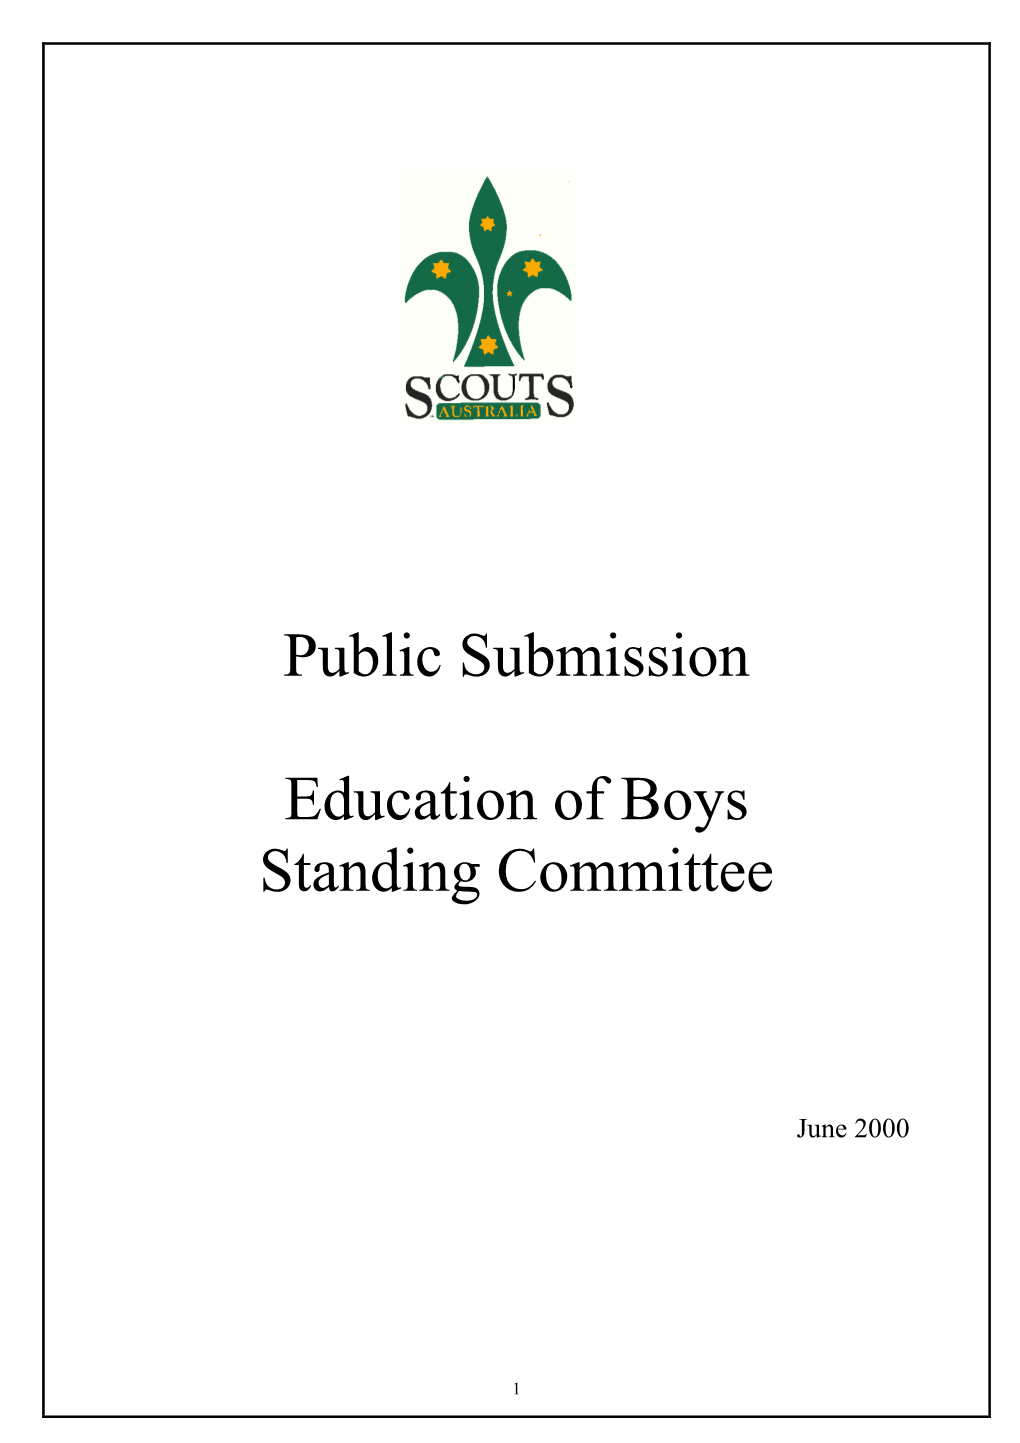 Public Submission Education of Boys Standing Committee